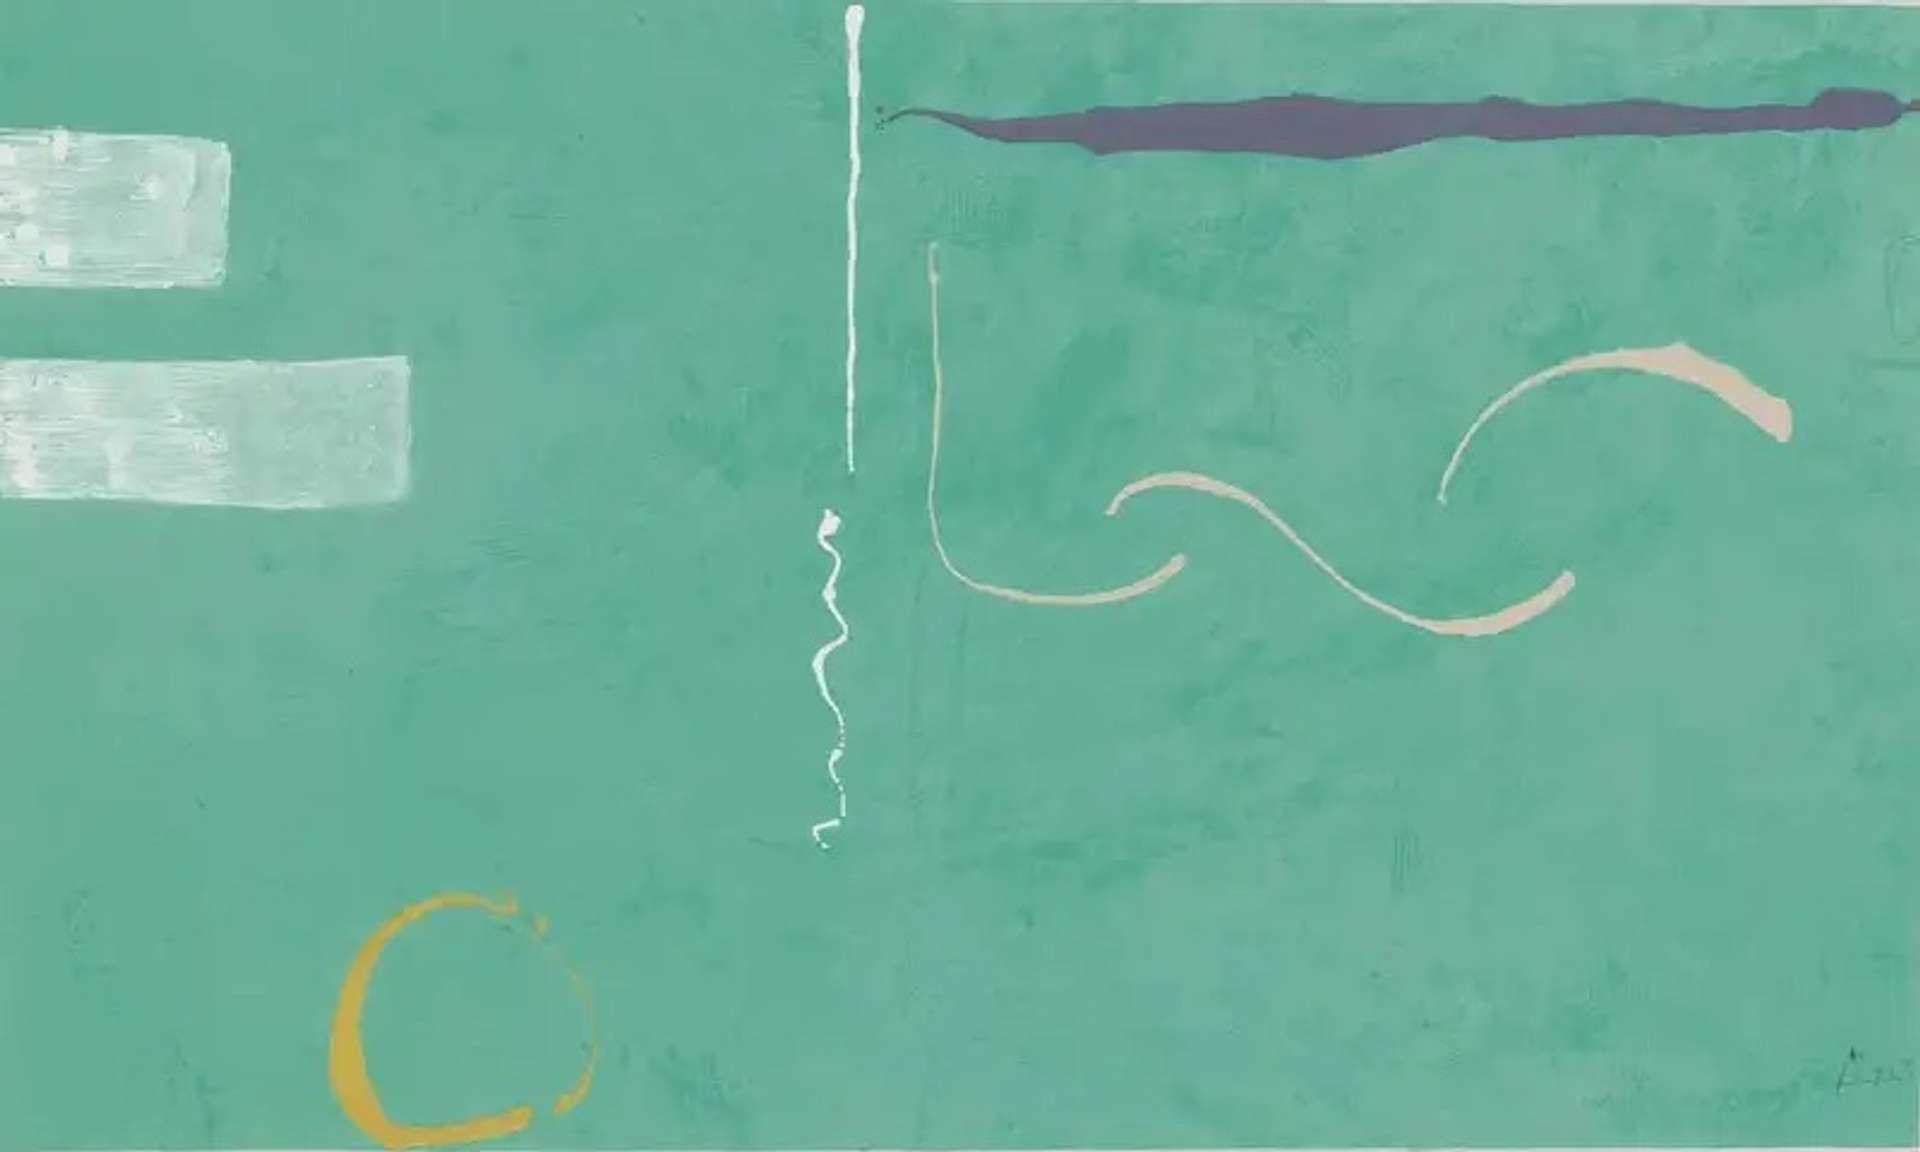 Helen Frankenthaler’s Tahiti. An abstract expressionist relief print of a green landscape with various shapes and markings. 